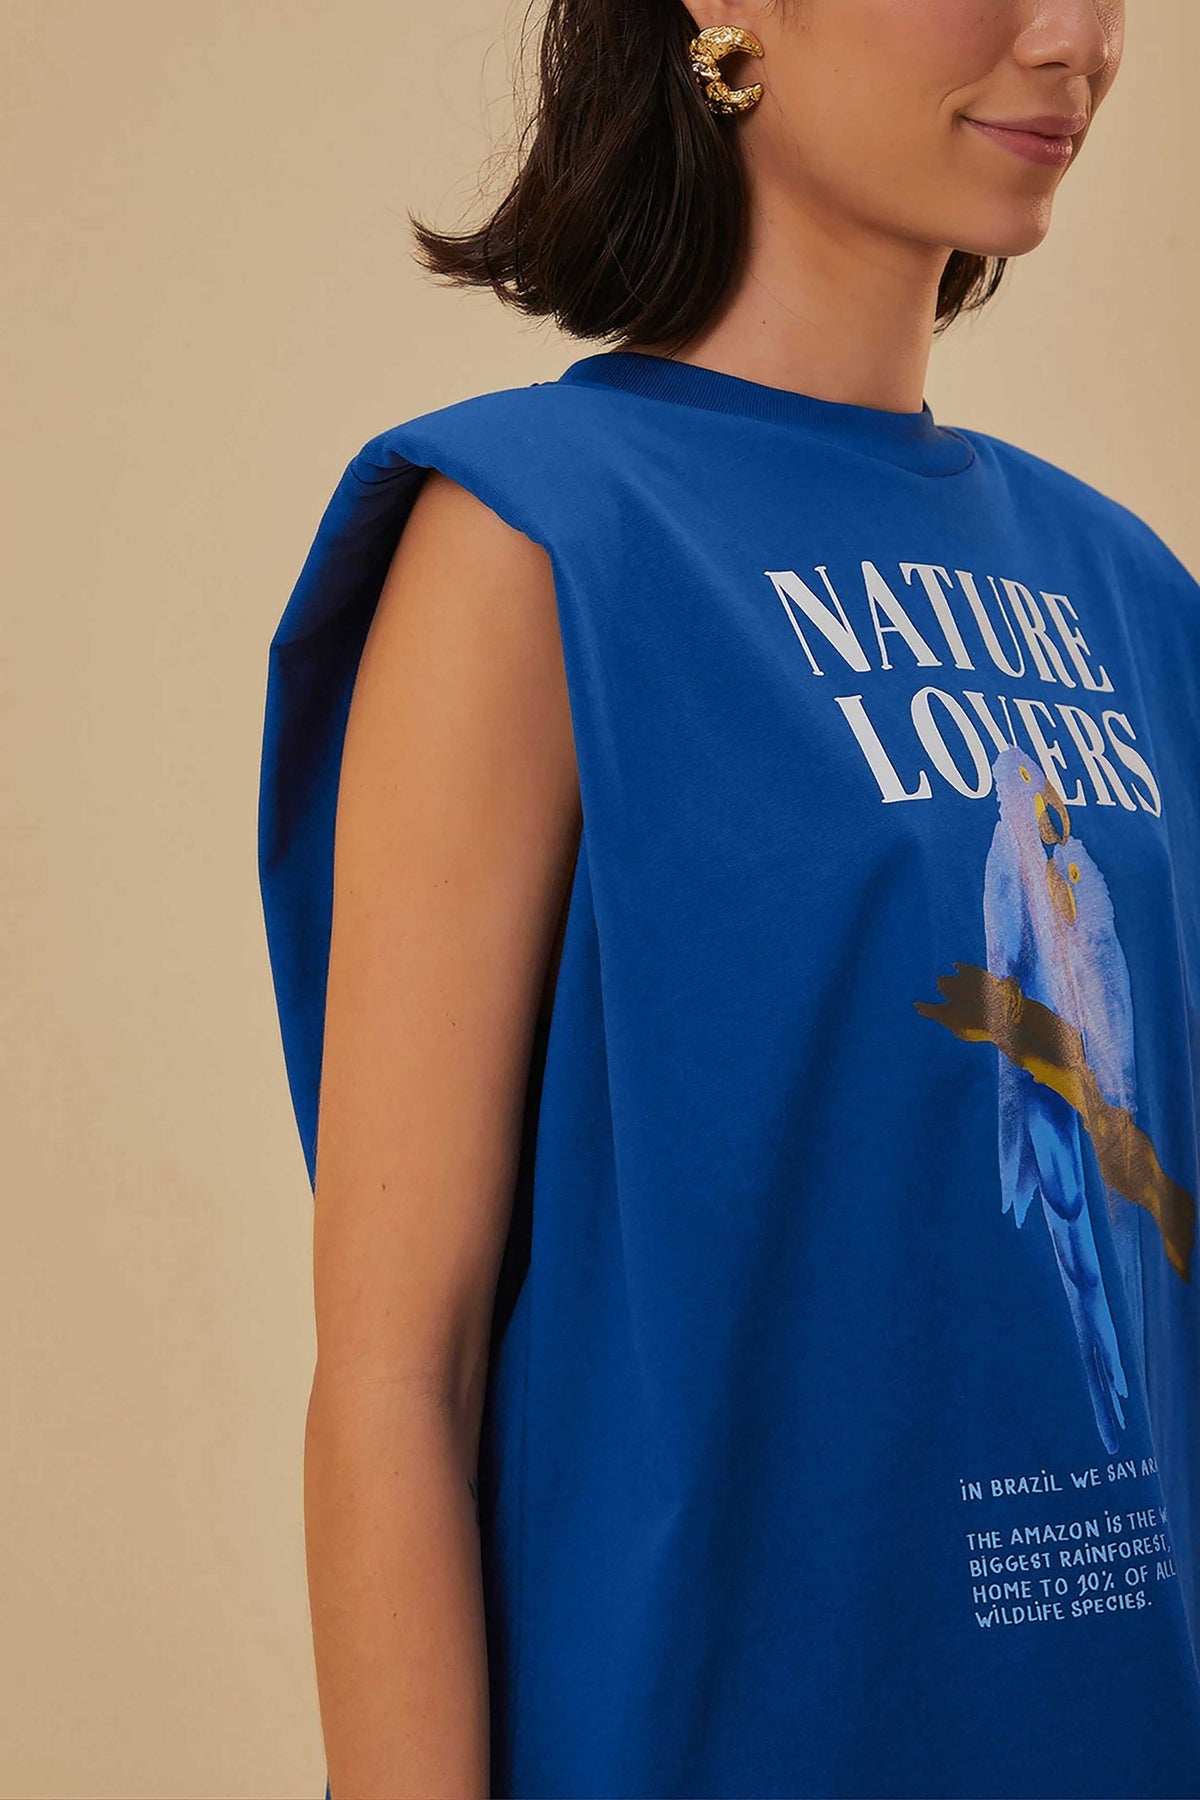 Blue Nature Lovers Pads Muscle Tee